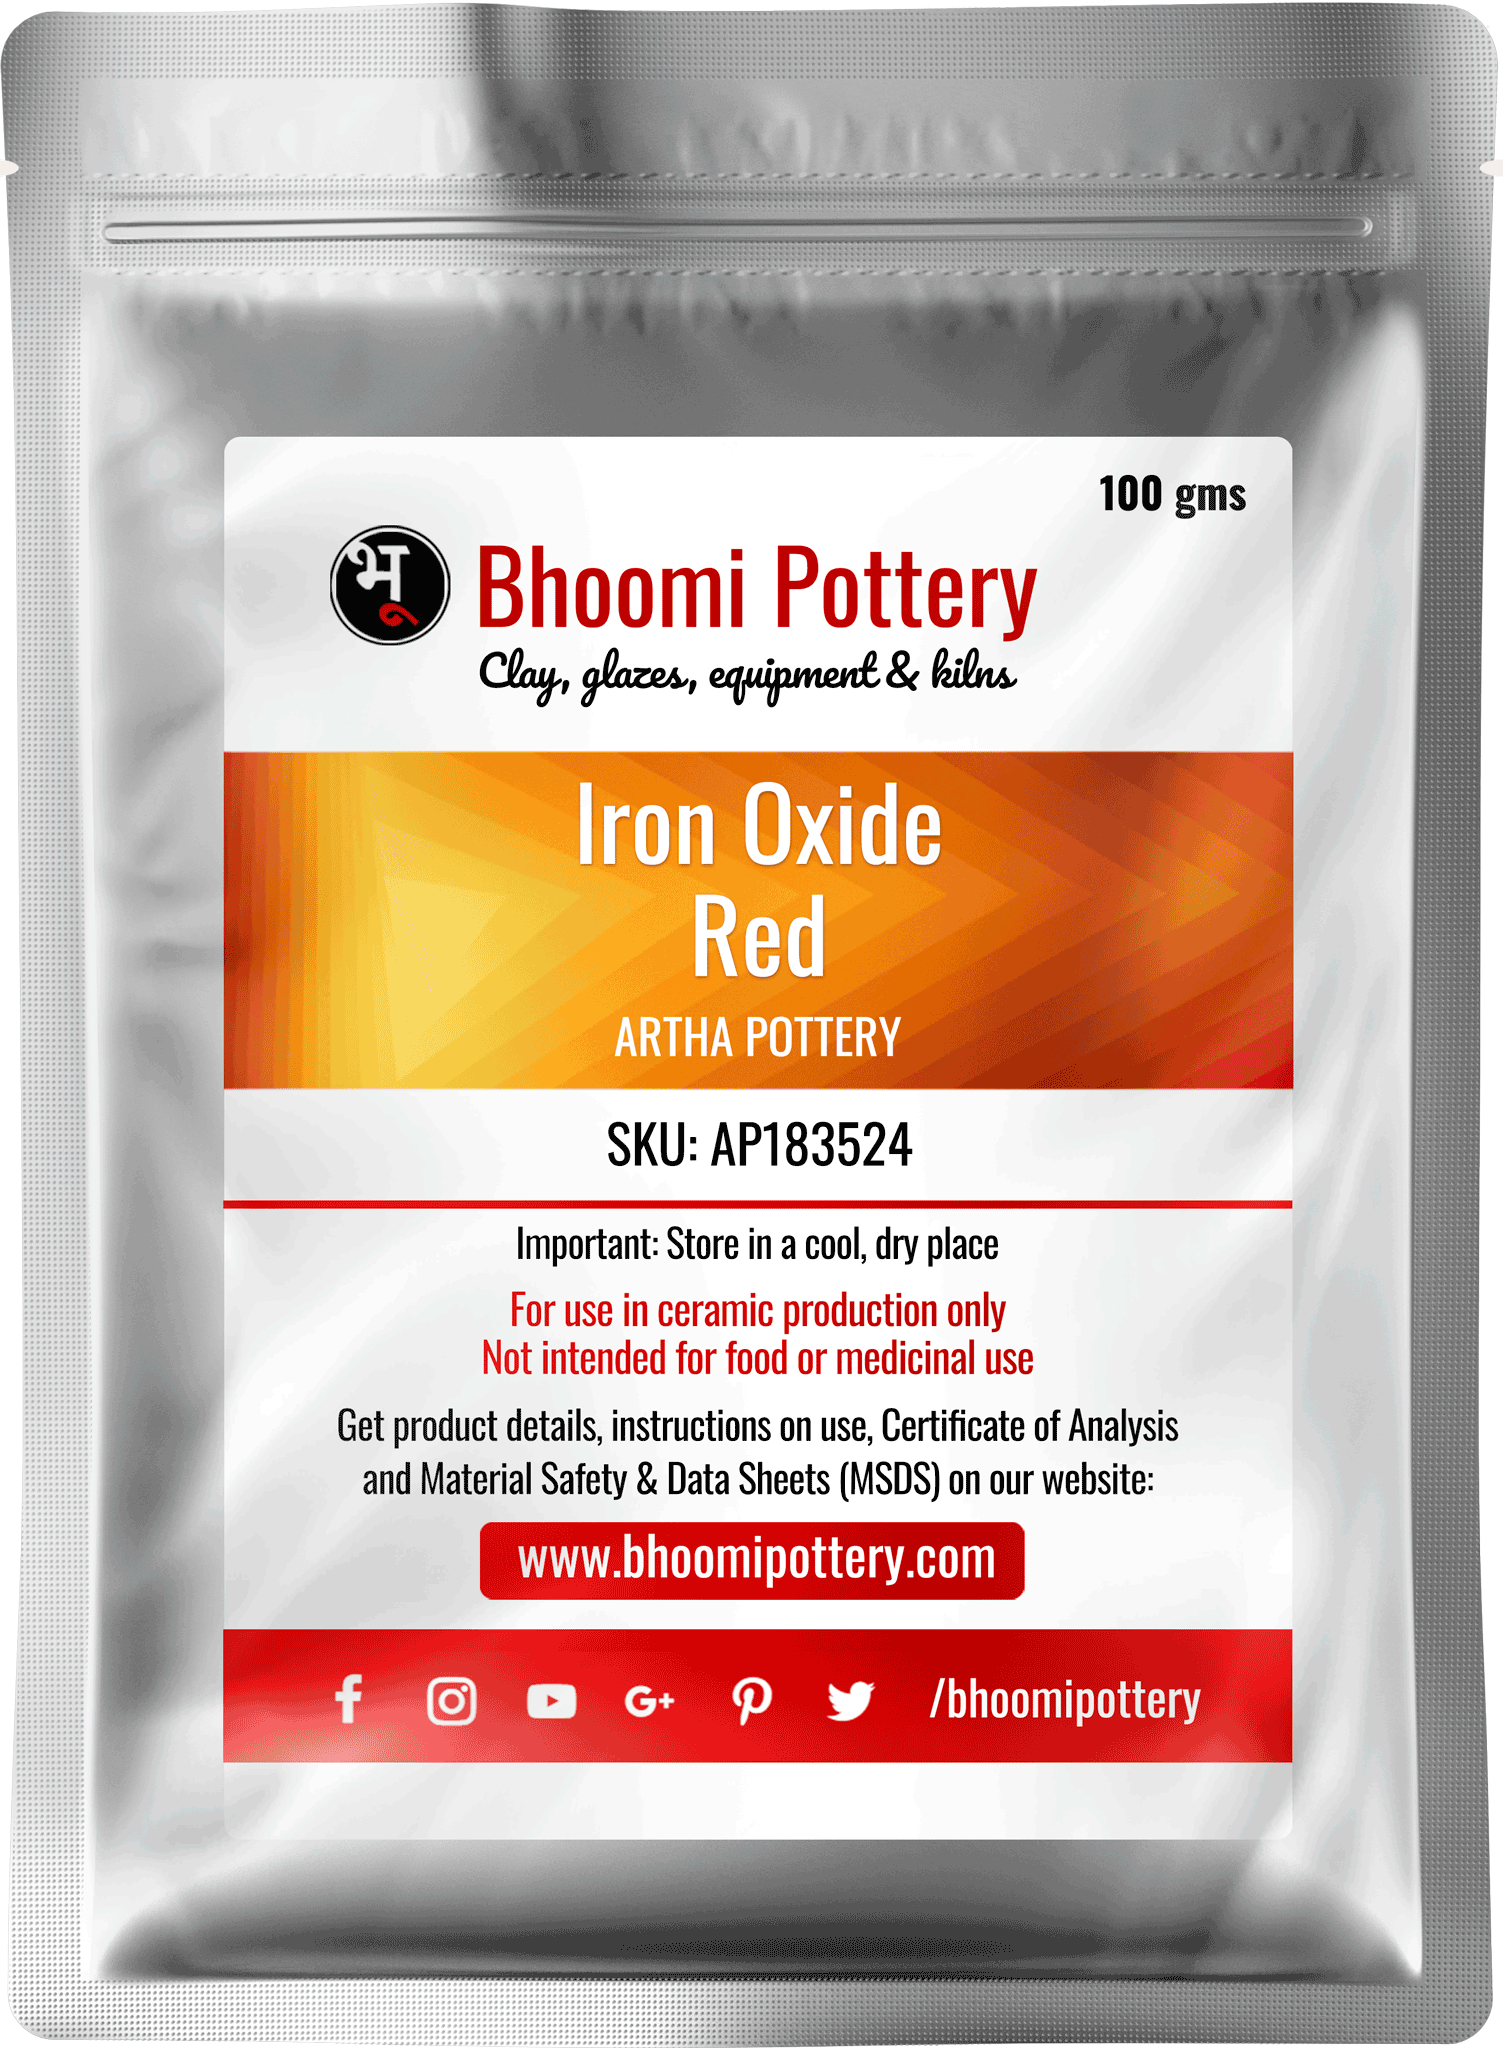 Artha Pottery Iron Oxide Red 100 gms for sale in India - Bhoomi Pottery